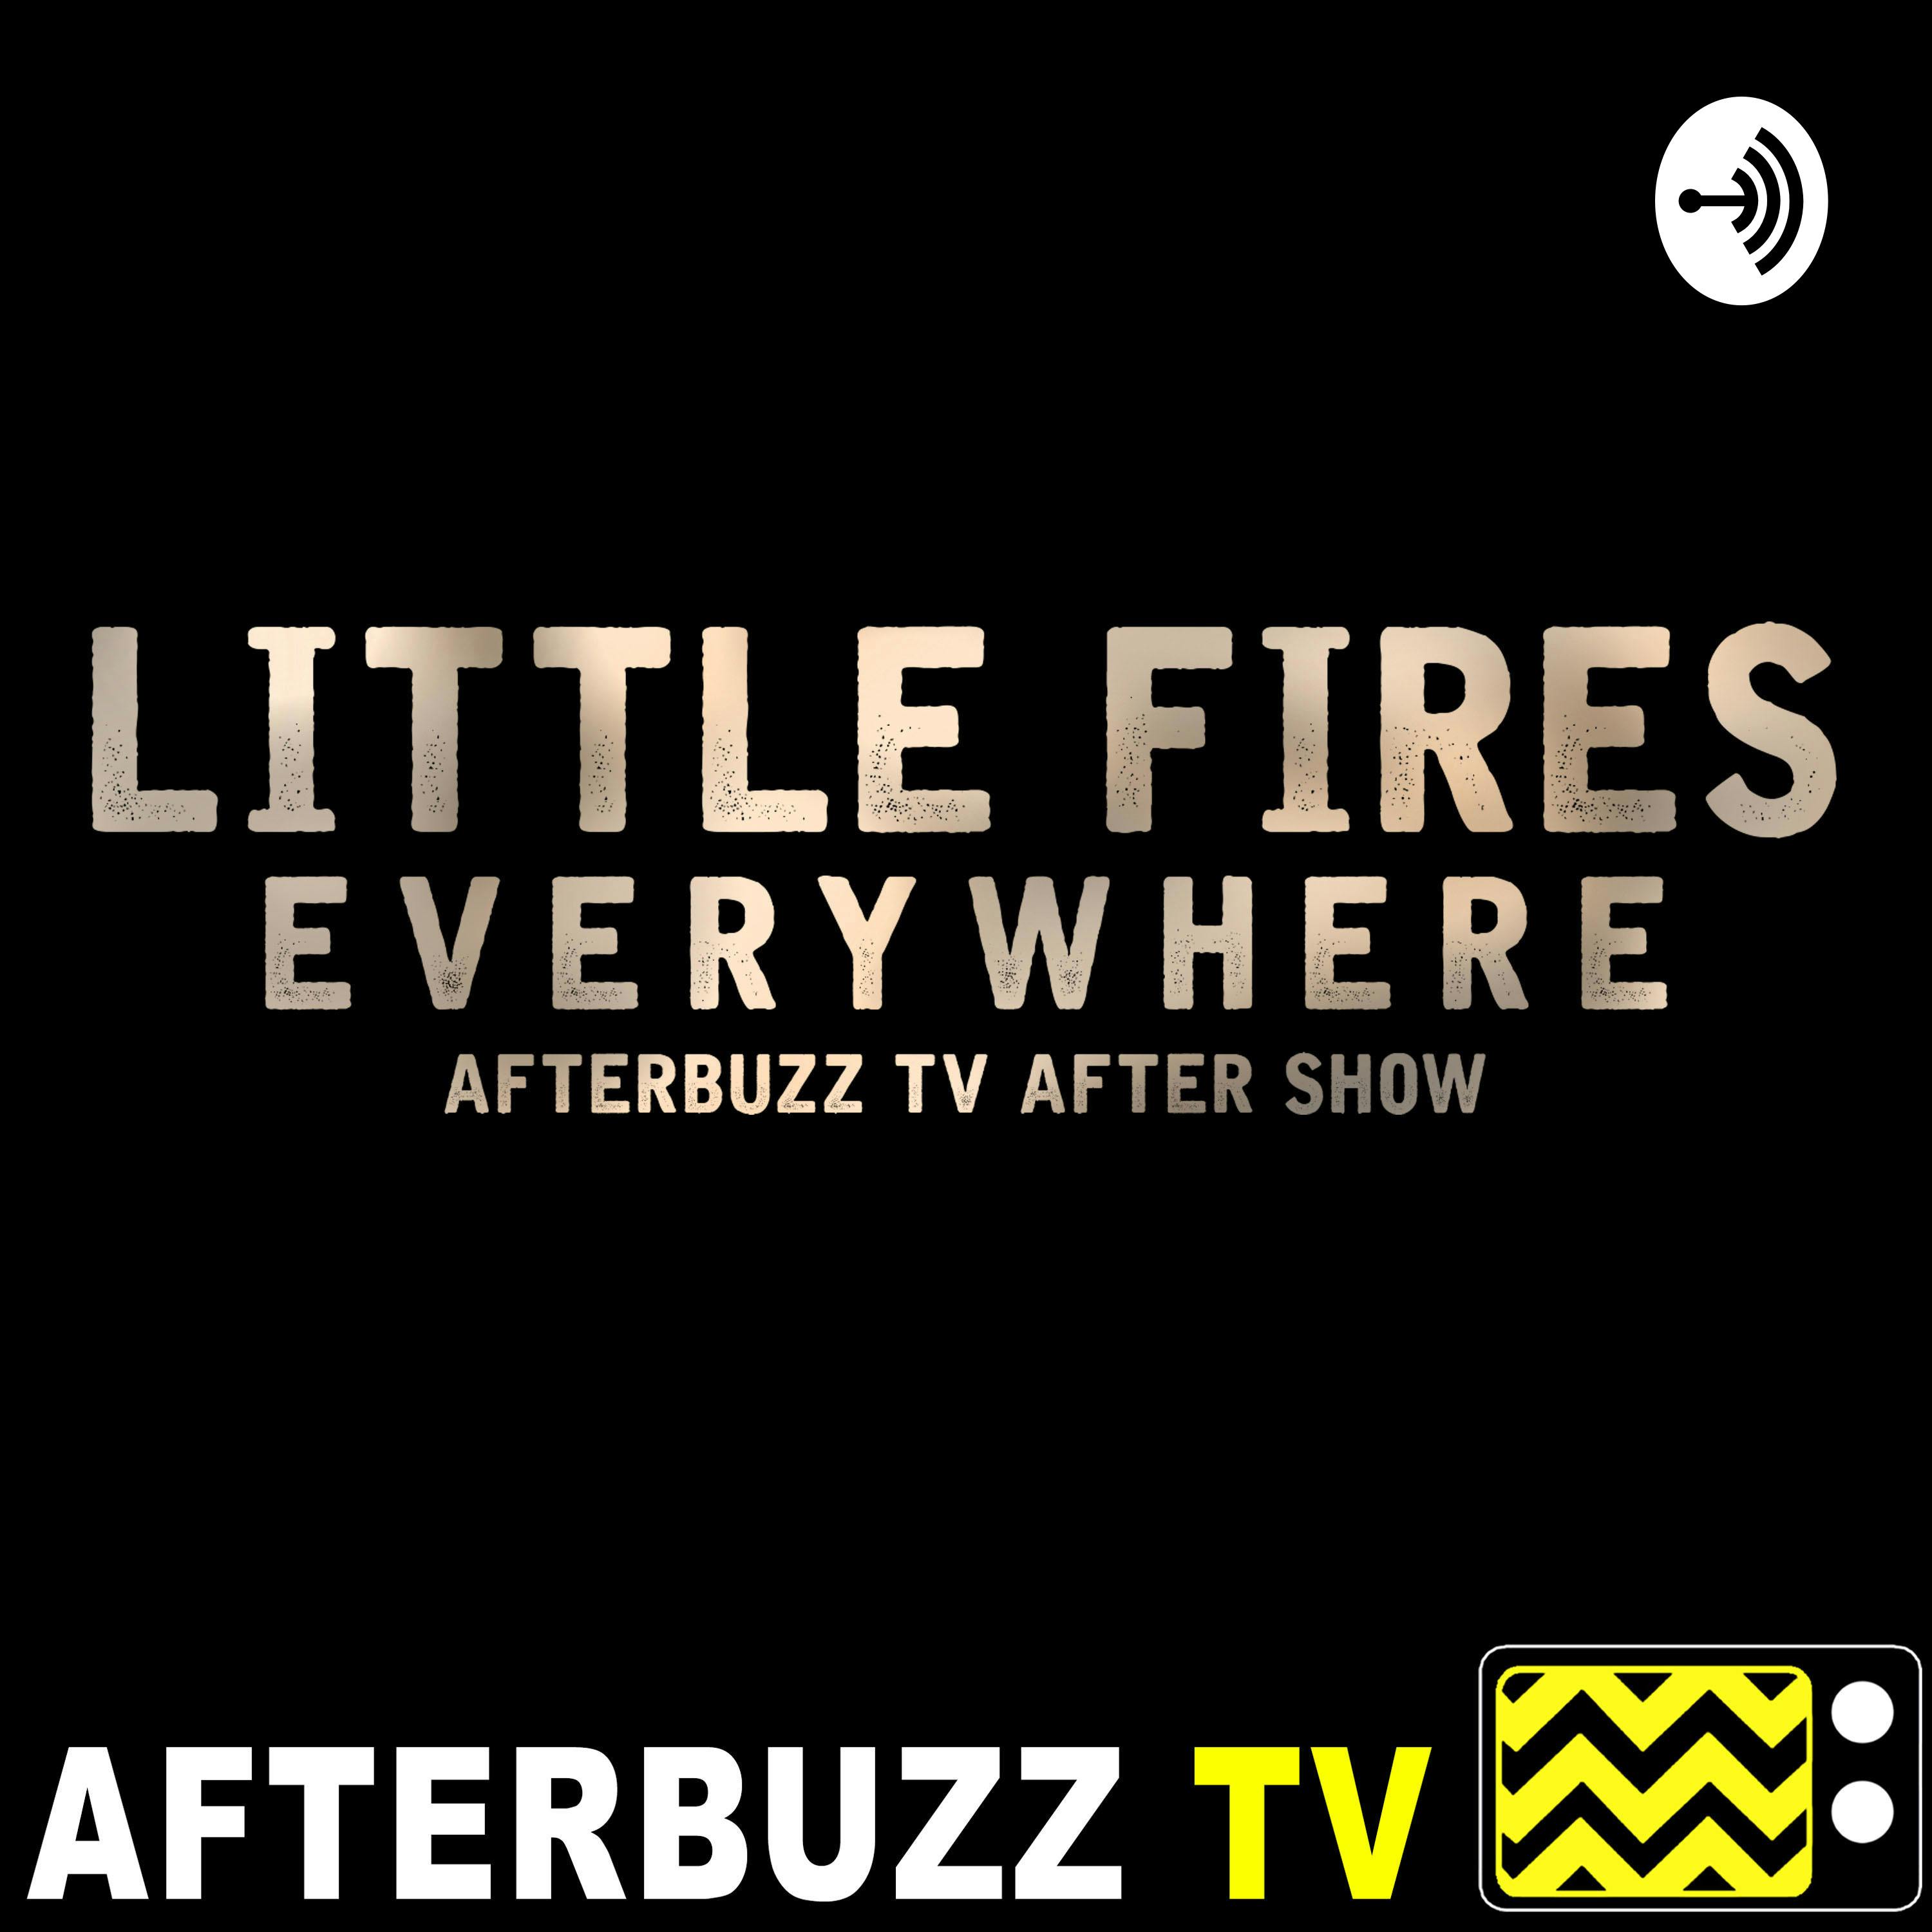 Little Fires Everywhere Indeed – S1 E8 ‘Little Fires Everywhere’ Recap & After Show